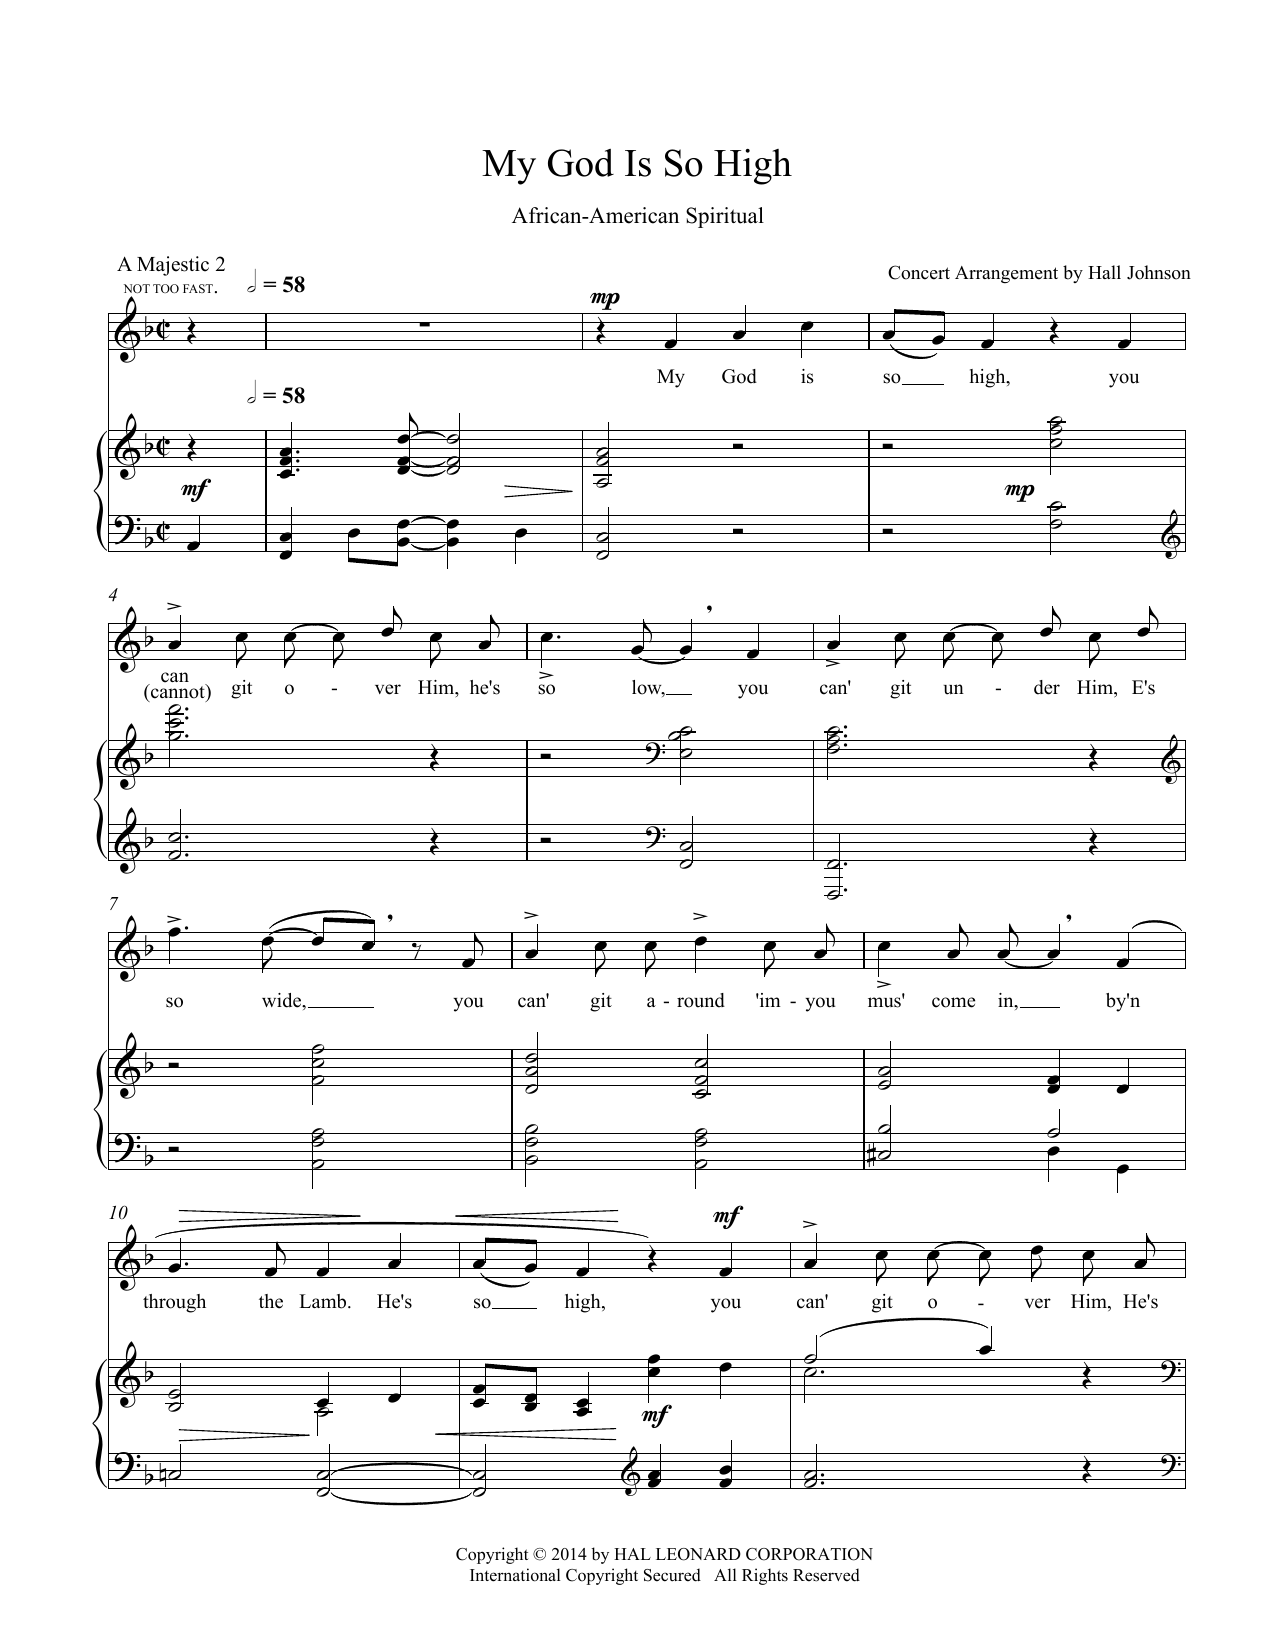 Hall Johnson My God Is So High (F) sheet music notes and chords. Download Printable PDF.